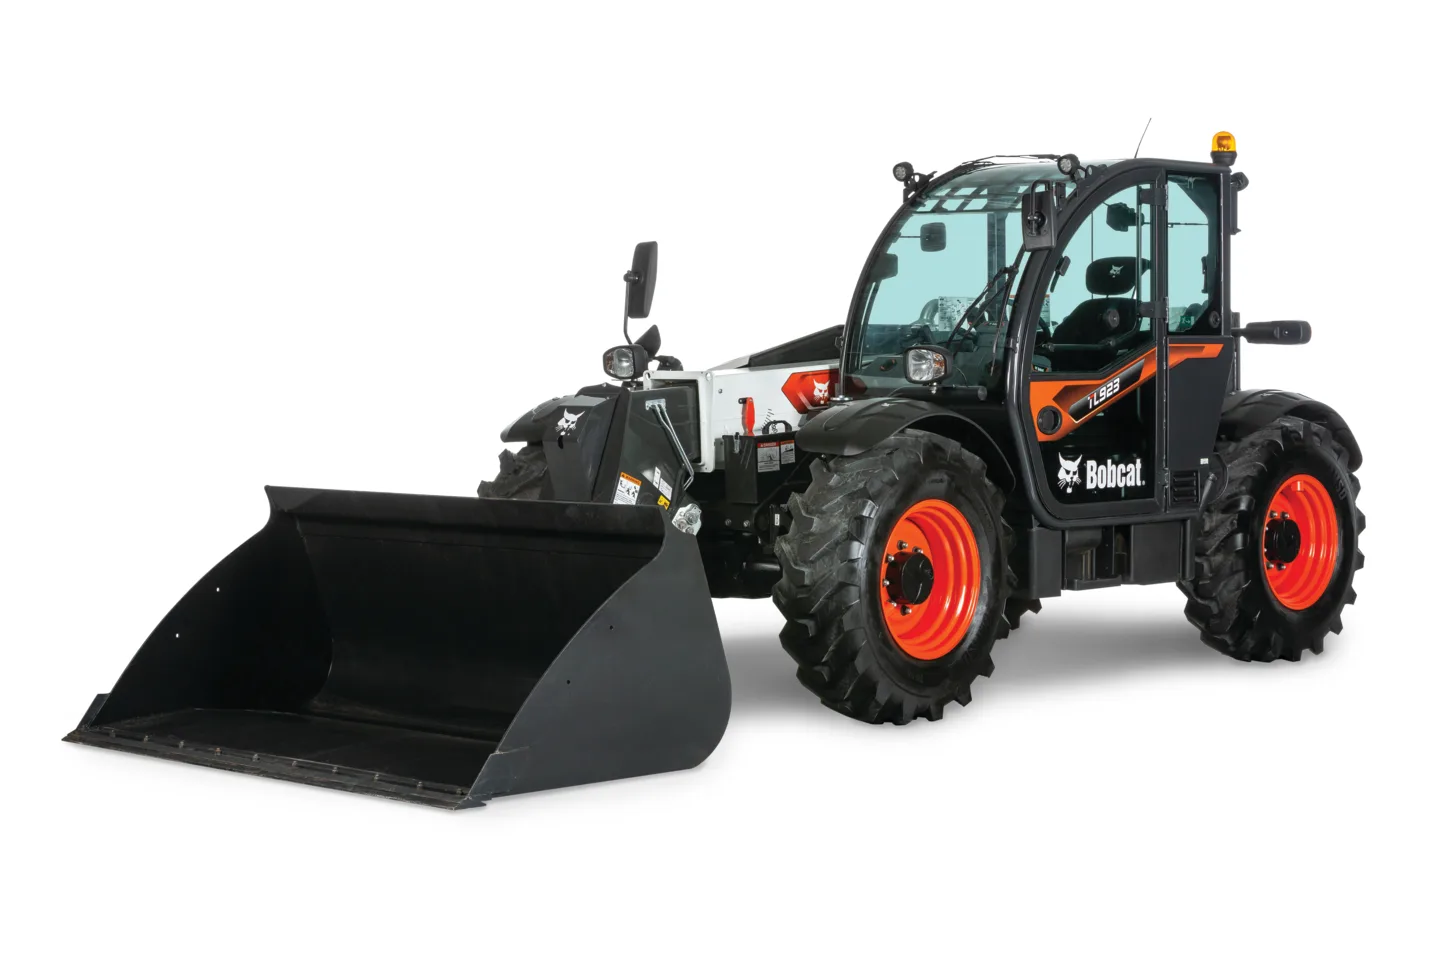 Browse Specs and more for the Bobcat TL923 Telehandler - Bobcat of Indy